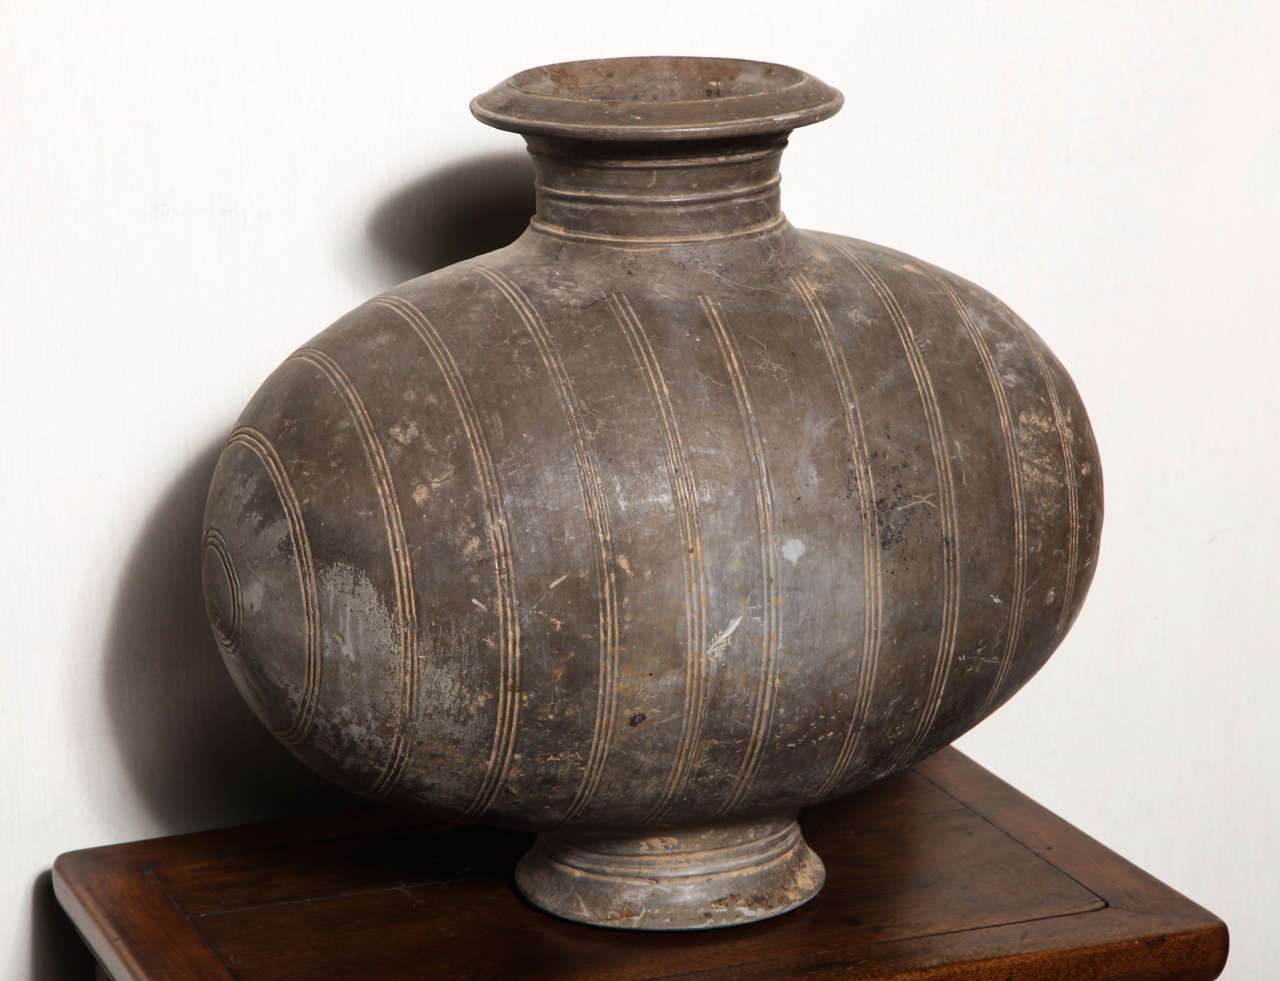 This rare terracotta cocoon jar with uncommon incised bands was made in China during the Western Han dynasty (206 B.C. - 9 A.D.). The jar features a dark grey color with lighter vertical incised bands on its belly. The cocoon shape refers to the